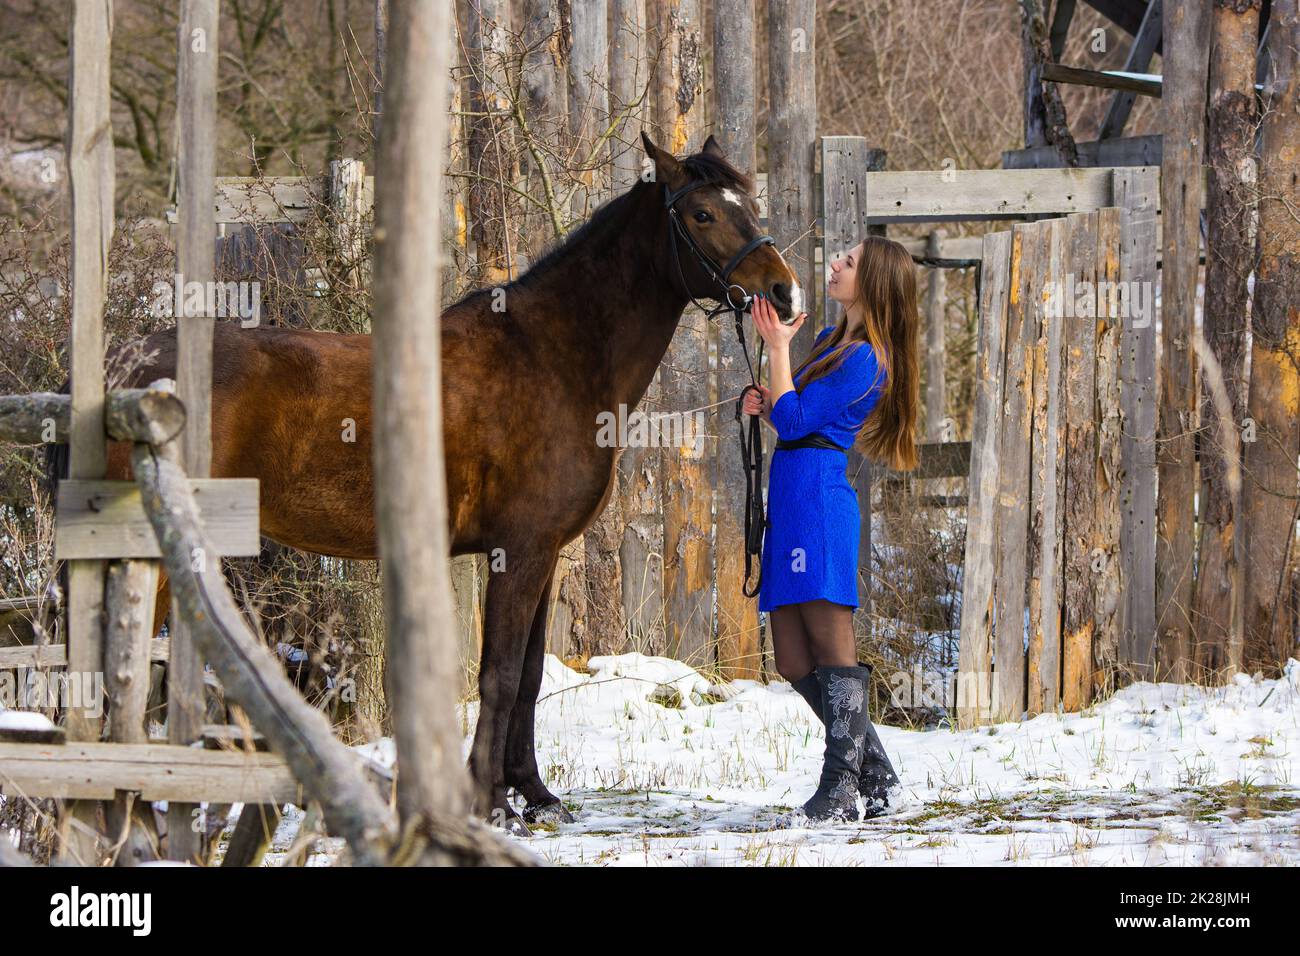 A beautiful girl in a blue dress stands with a horse against the background of an old wooden fence Stock Photo